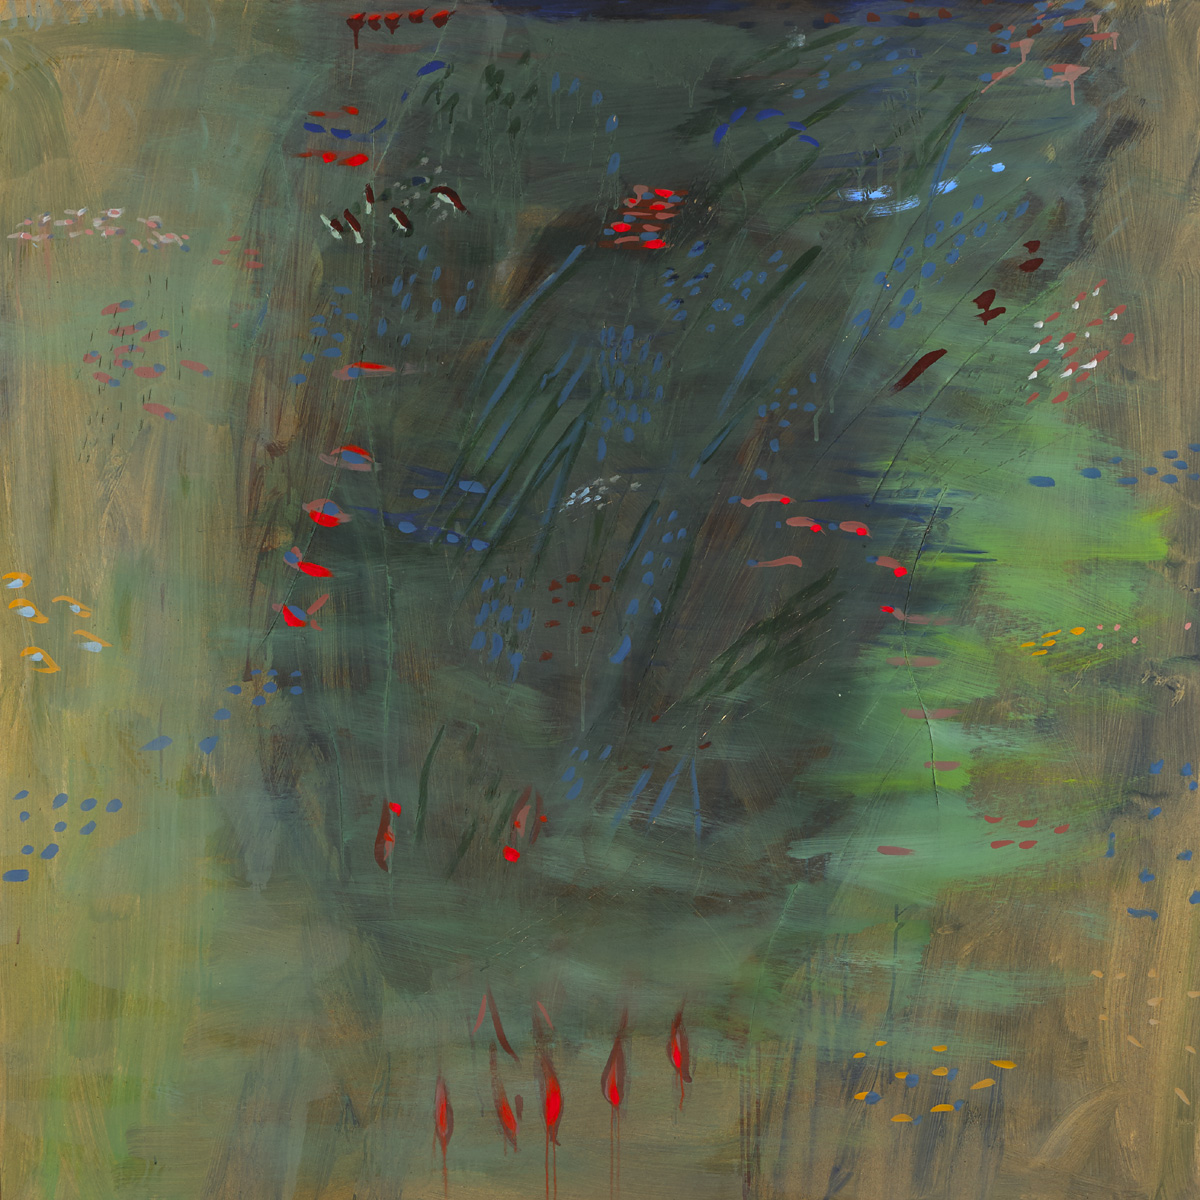 POND REVERIE I, 1994 by Tony O'Malley sold for 22,000 at Whyte's Auctions